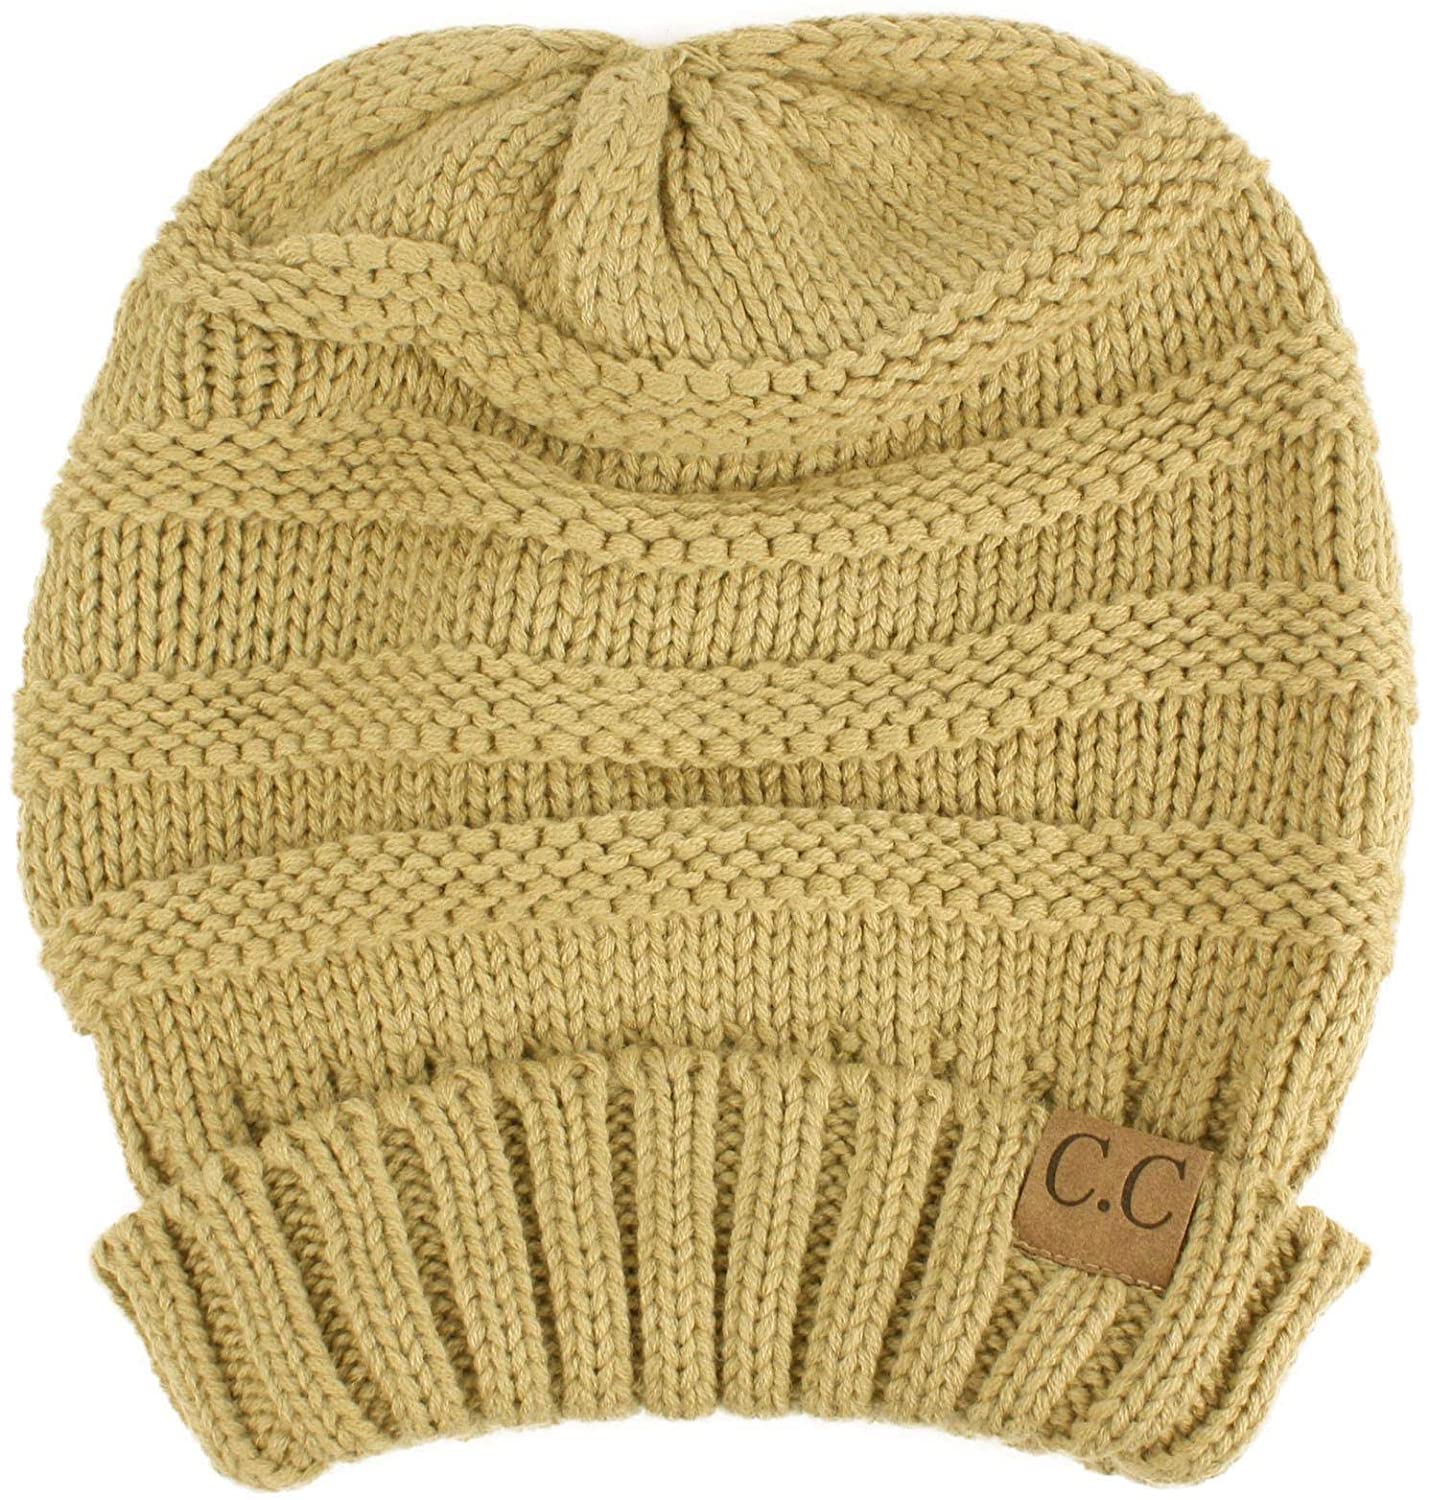 CC Winter Trendy Warm Oversized Chunky Baggy Stretchy Slouchy Skully Beanie Hat - image 2 of 2